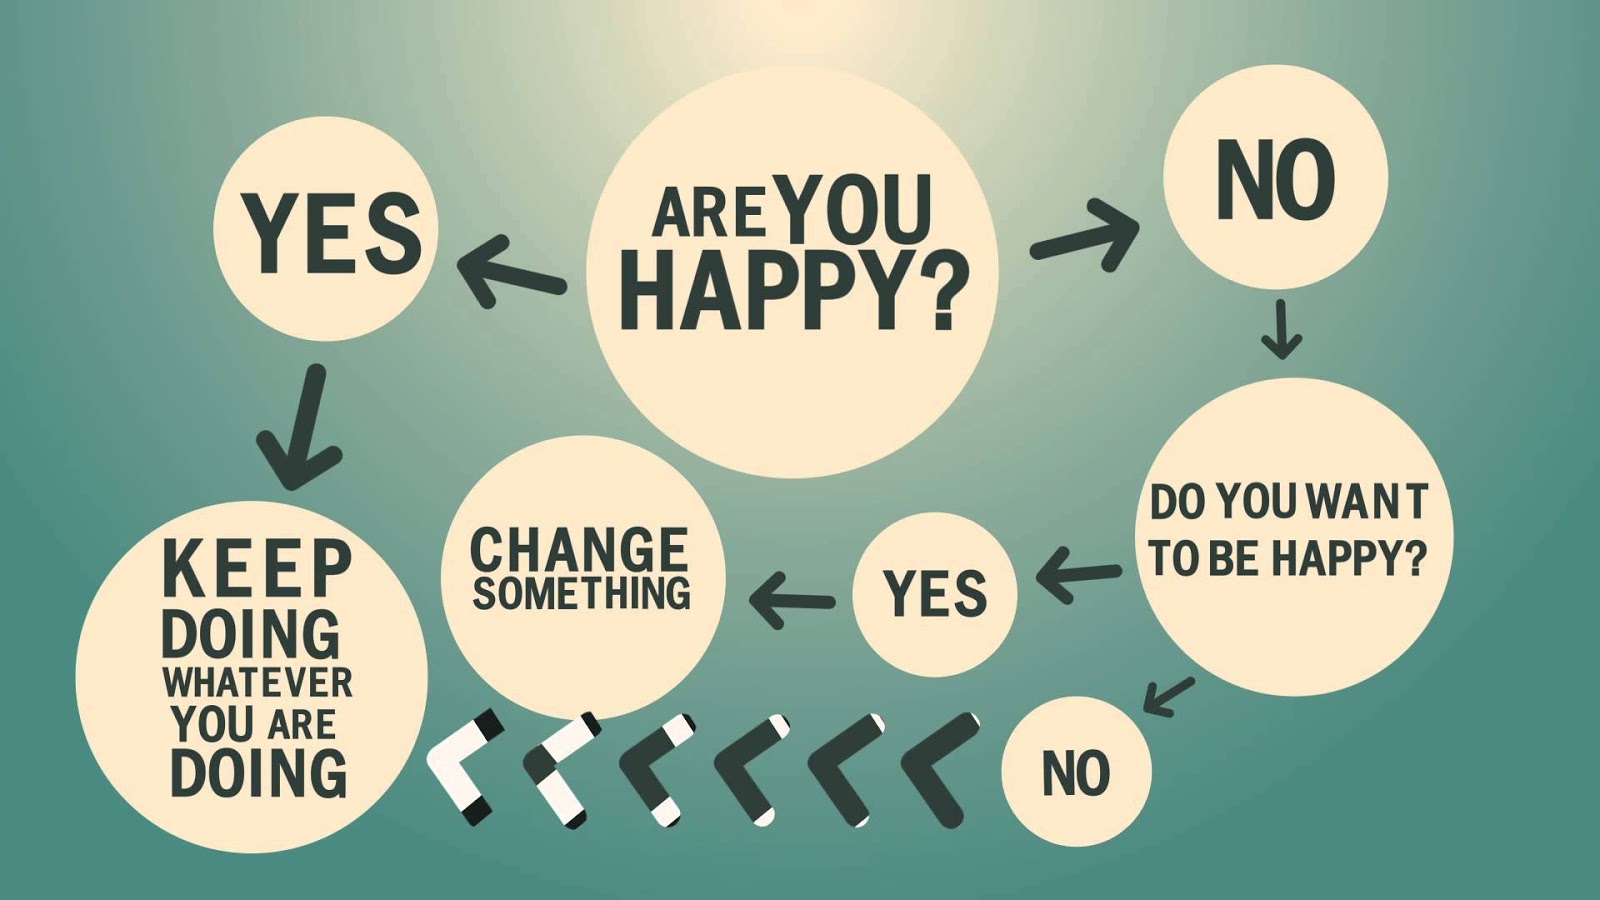 Are you happy yes. Keep изменение. Yes Happiness. Keep doing something. Self Motivation.